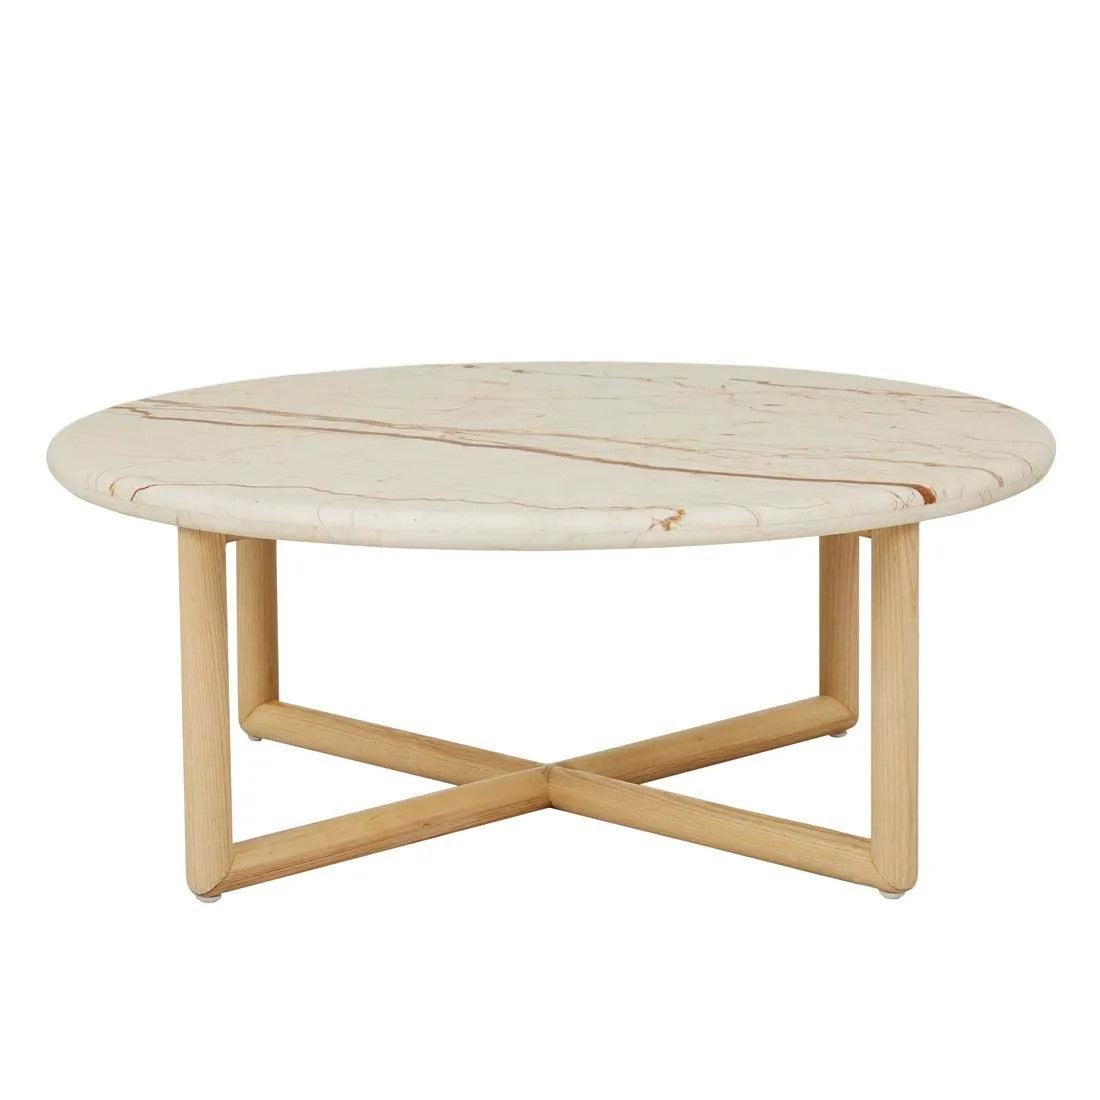 Camille Marble Coffee Table